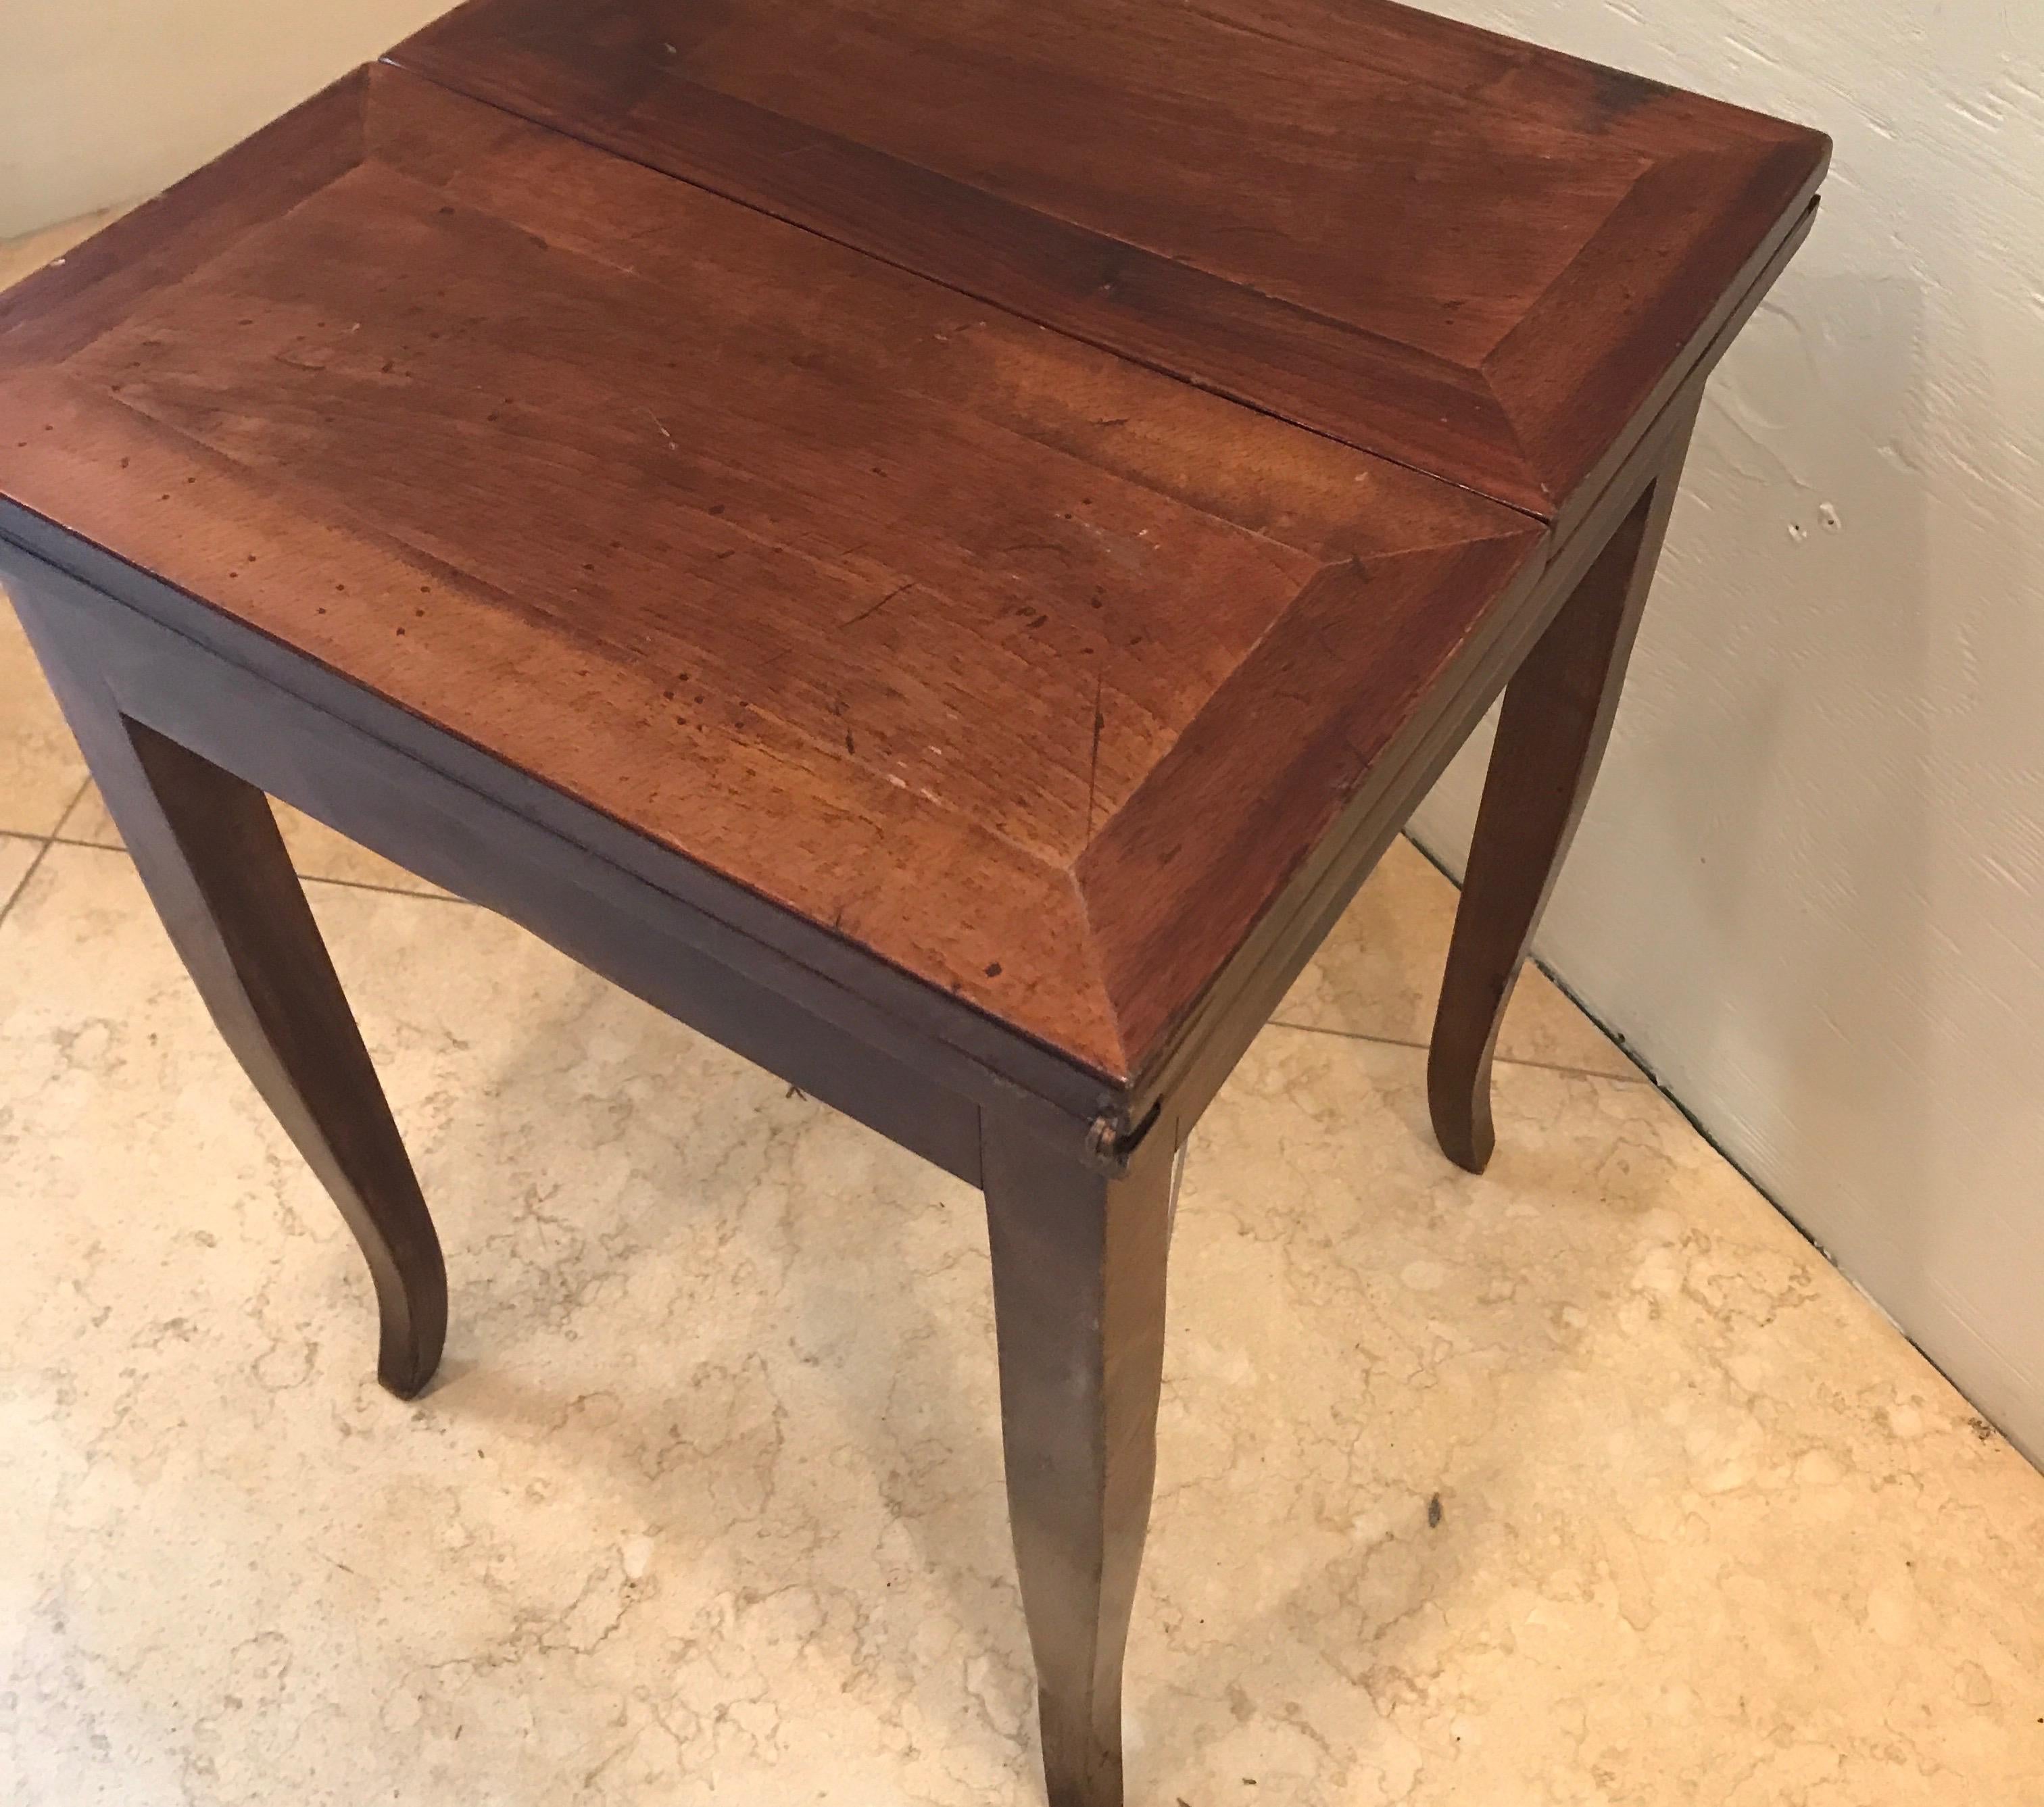 Italian walnut side table that flips open to become serving table.